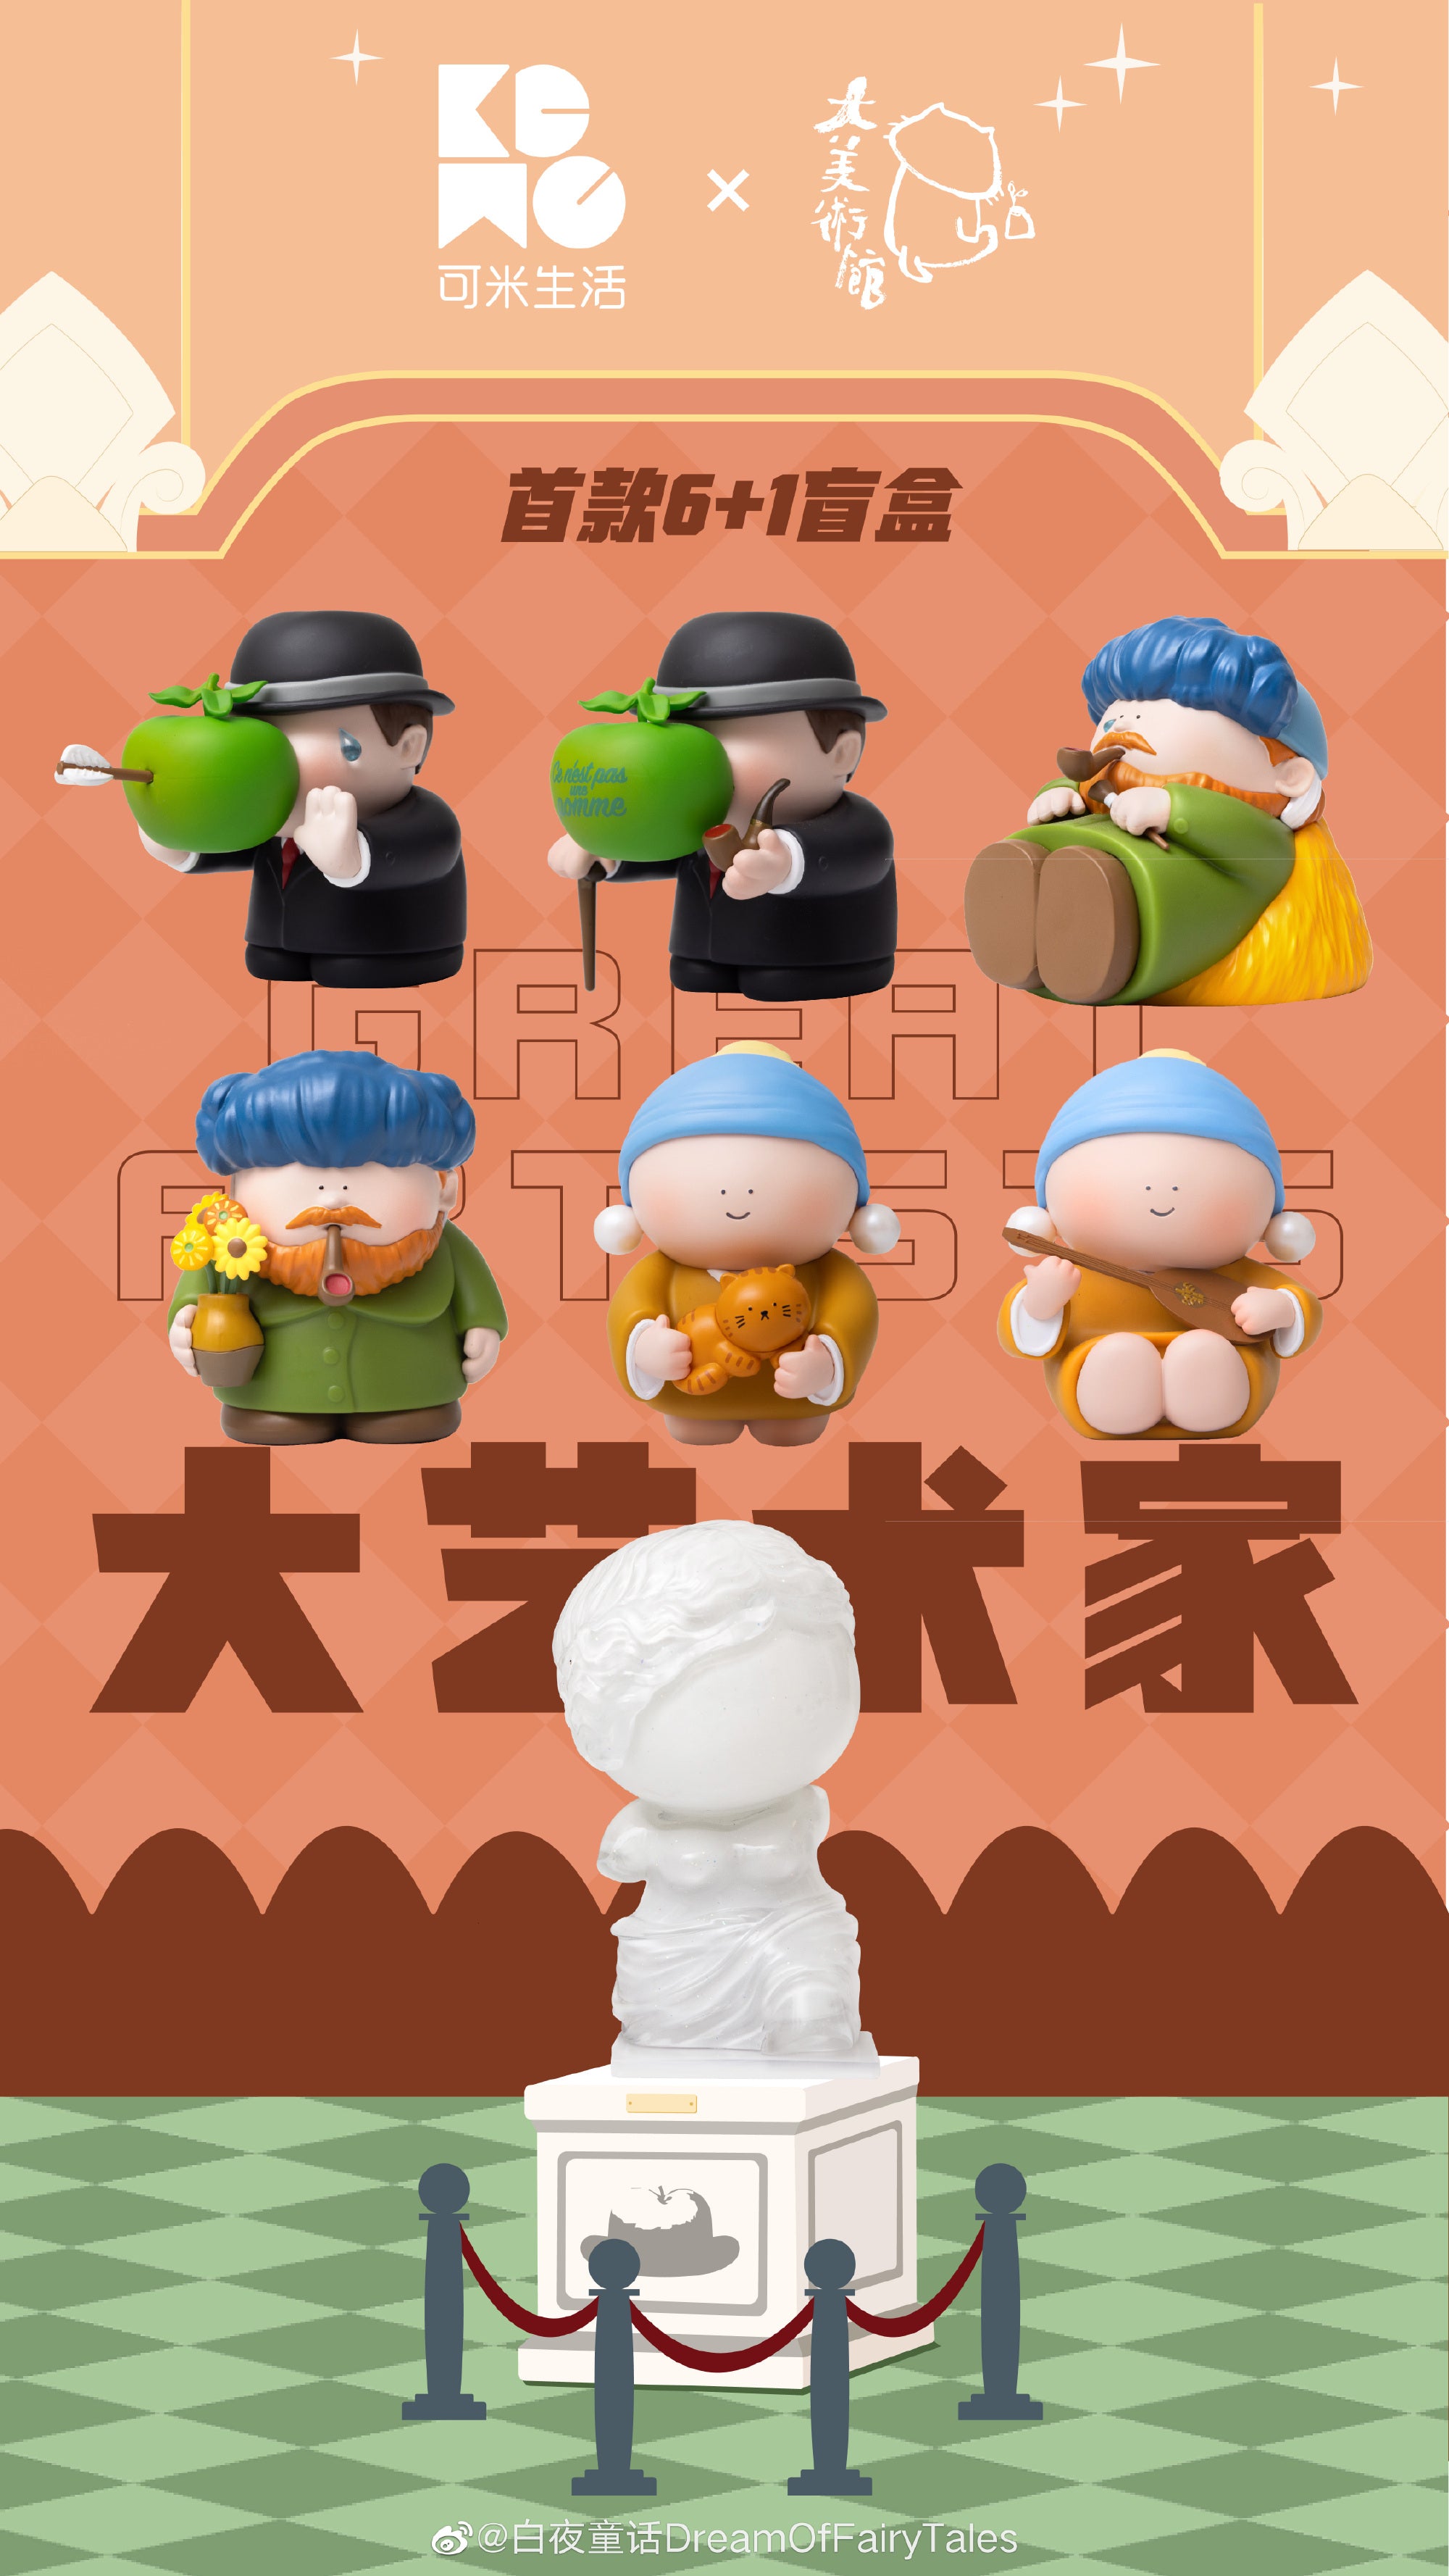 Great Artists Blind Box Series from Keme Life